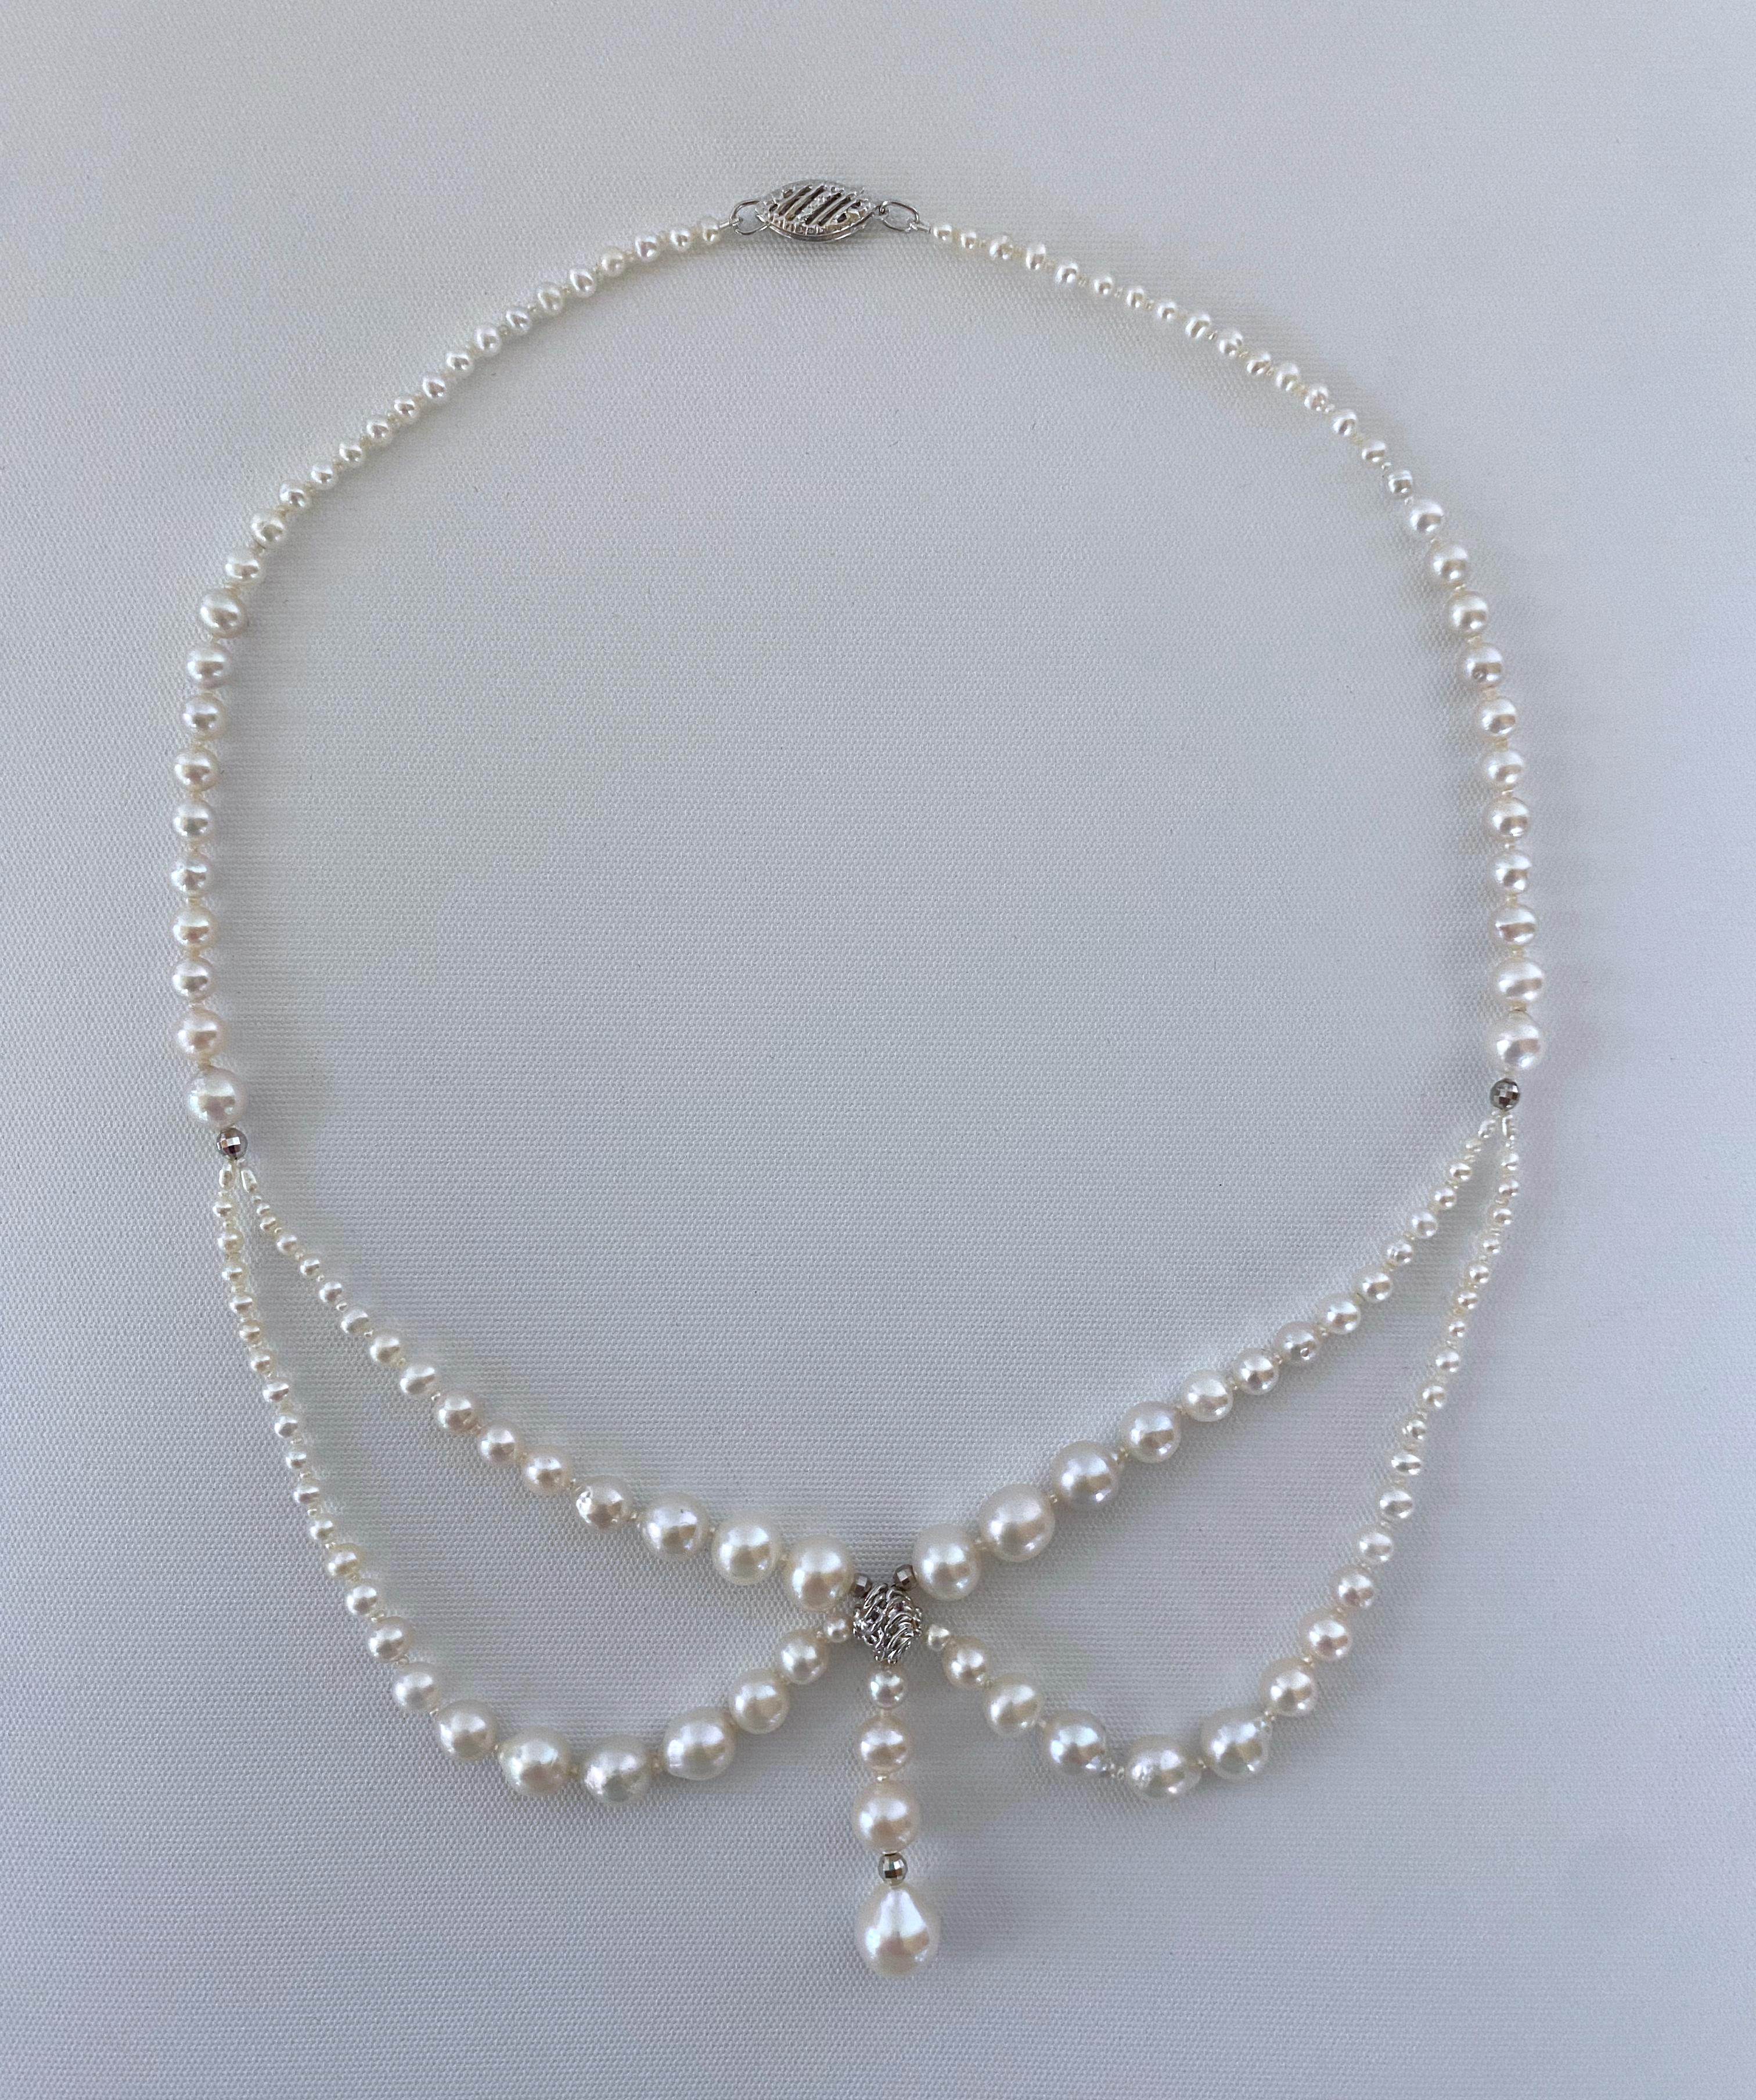 Bead Marina J. Victorian Inspired Draped Pearl and Silver Rhodium PlatedNecklace For Sale